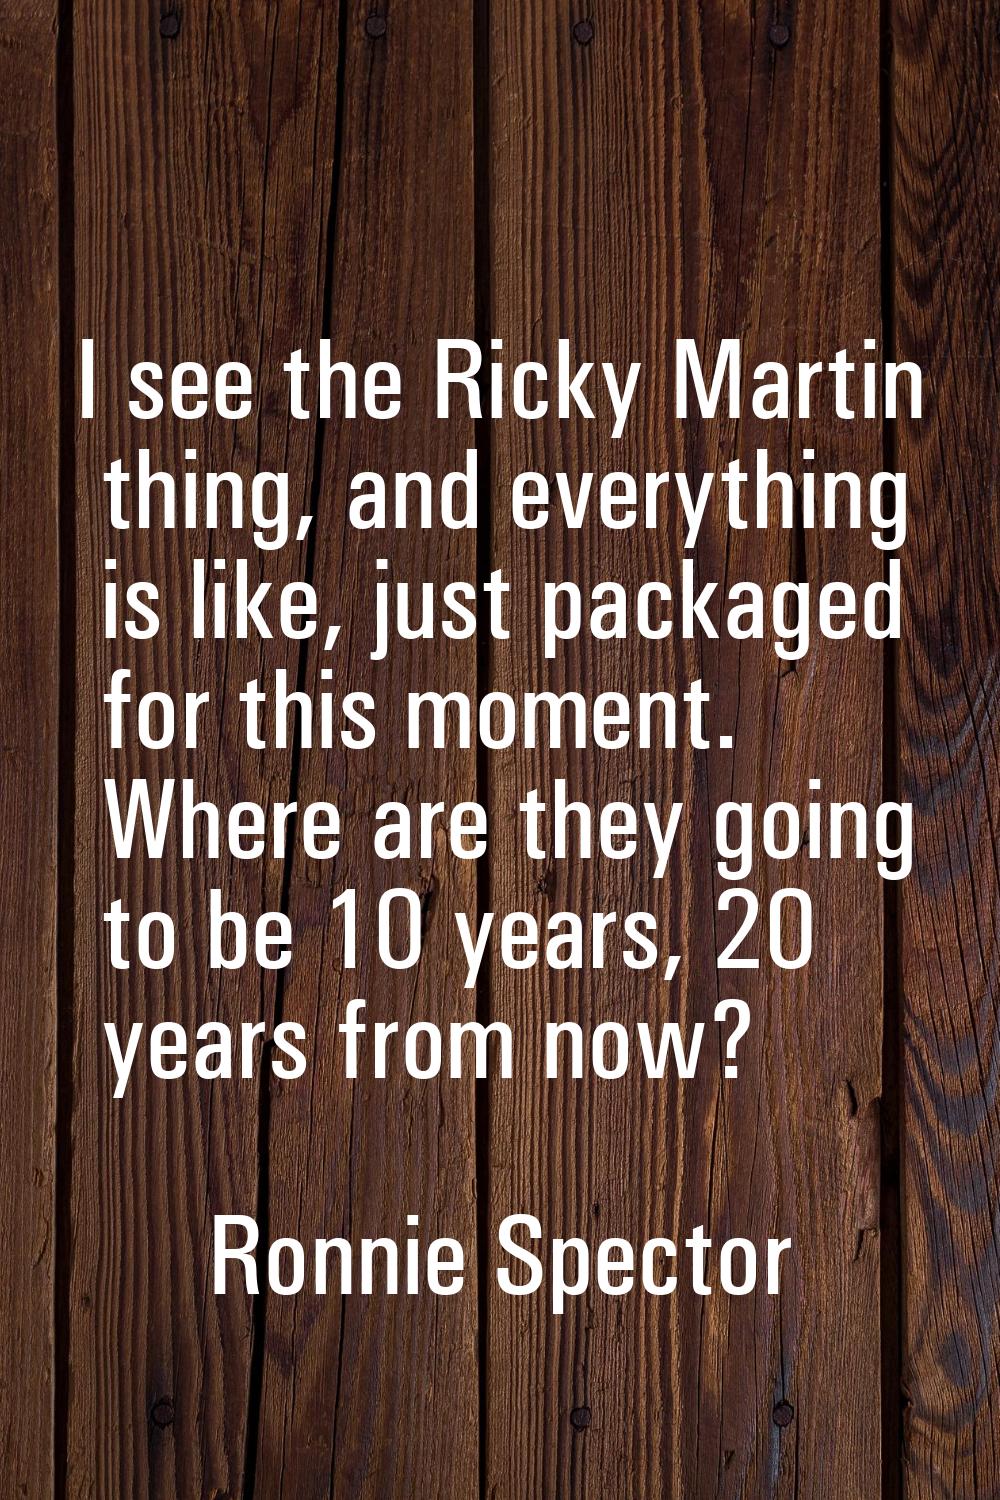 I see the Ricky Martin thing, and everything is like, just packaged for this moment. Where are they